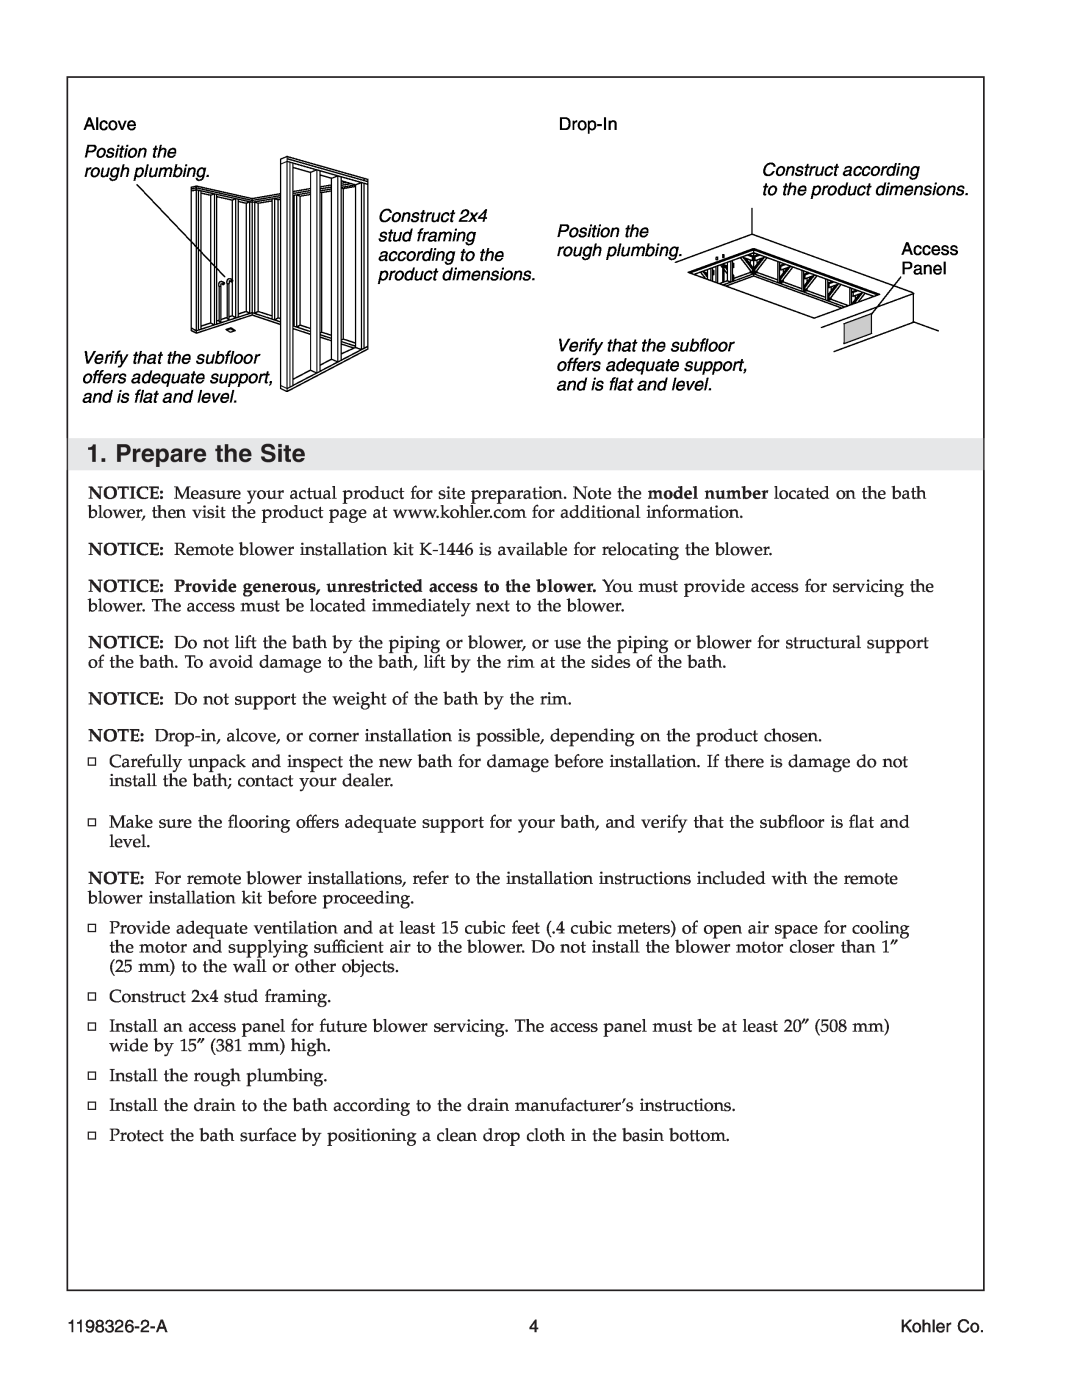 Kohler 1198326-2-A manual Prepare the Site, Position the rough plumbing, Construct according, to the product dimensions 